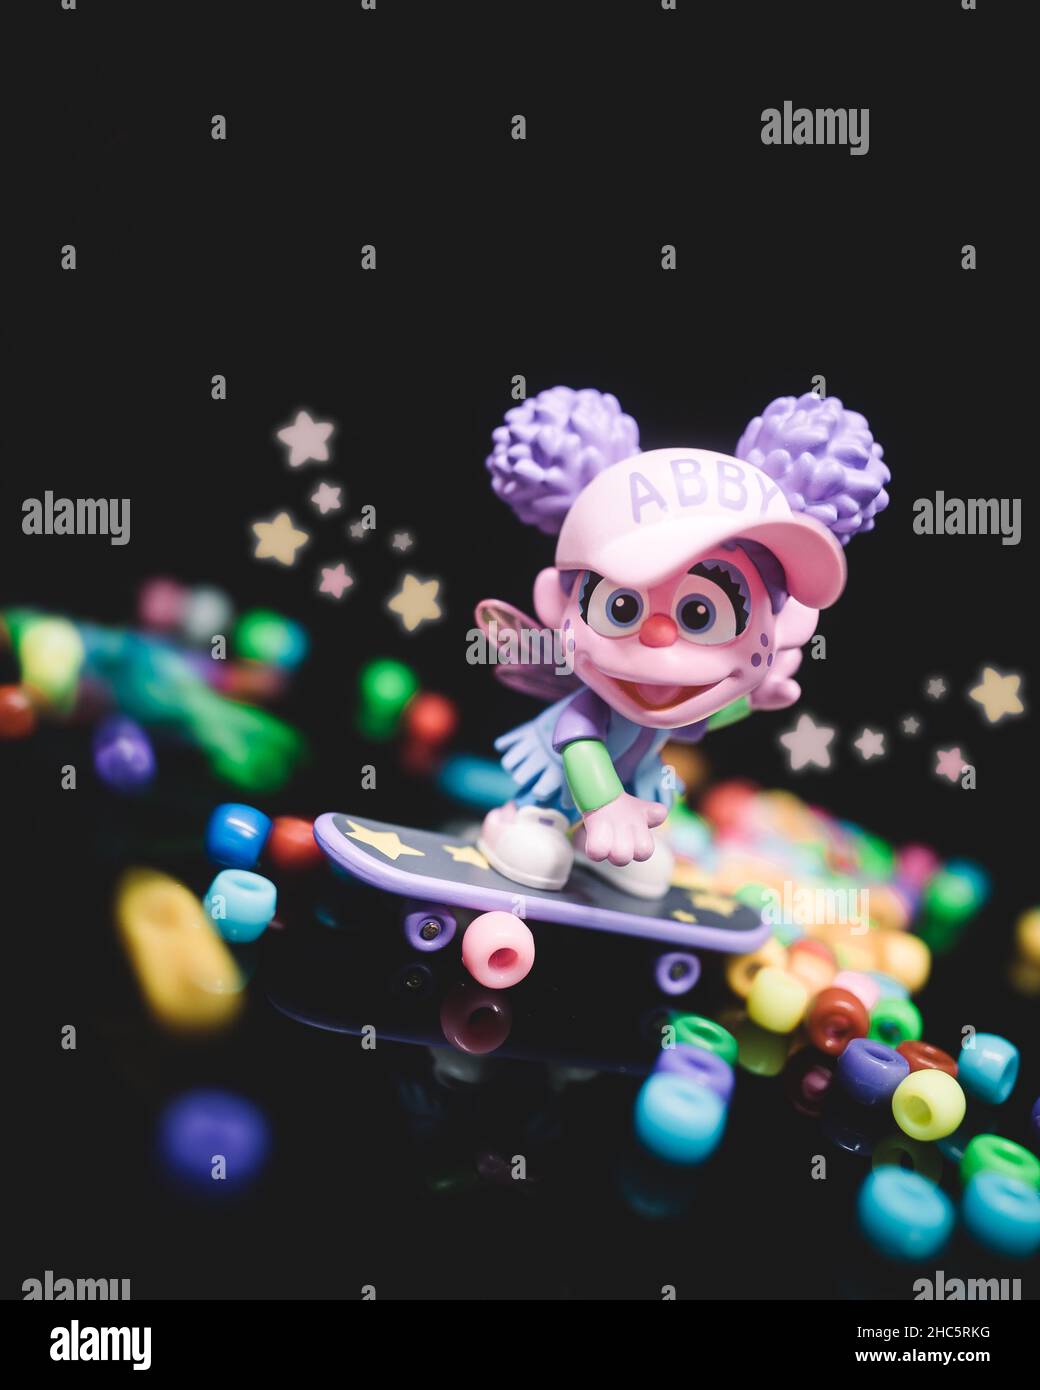 A vertical shot of a toy of Abby from Sesame Street riding a skateboard on a black background Stock Photo